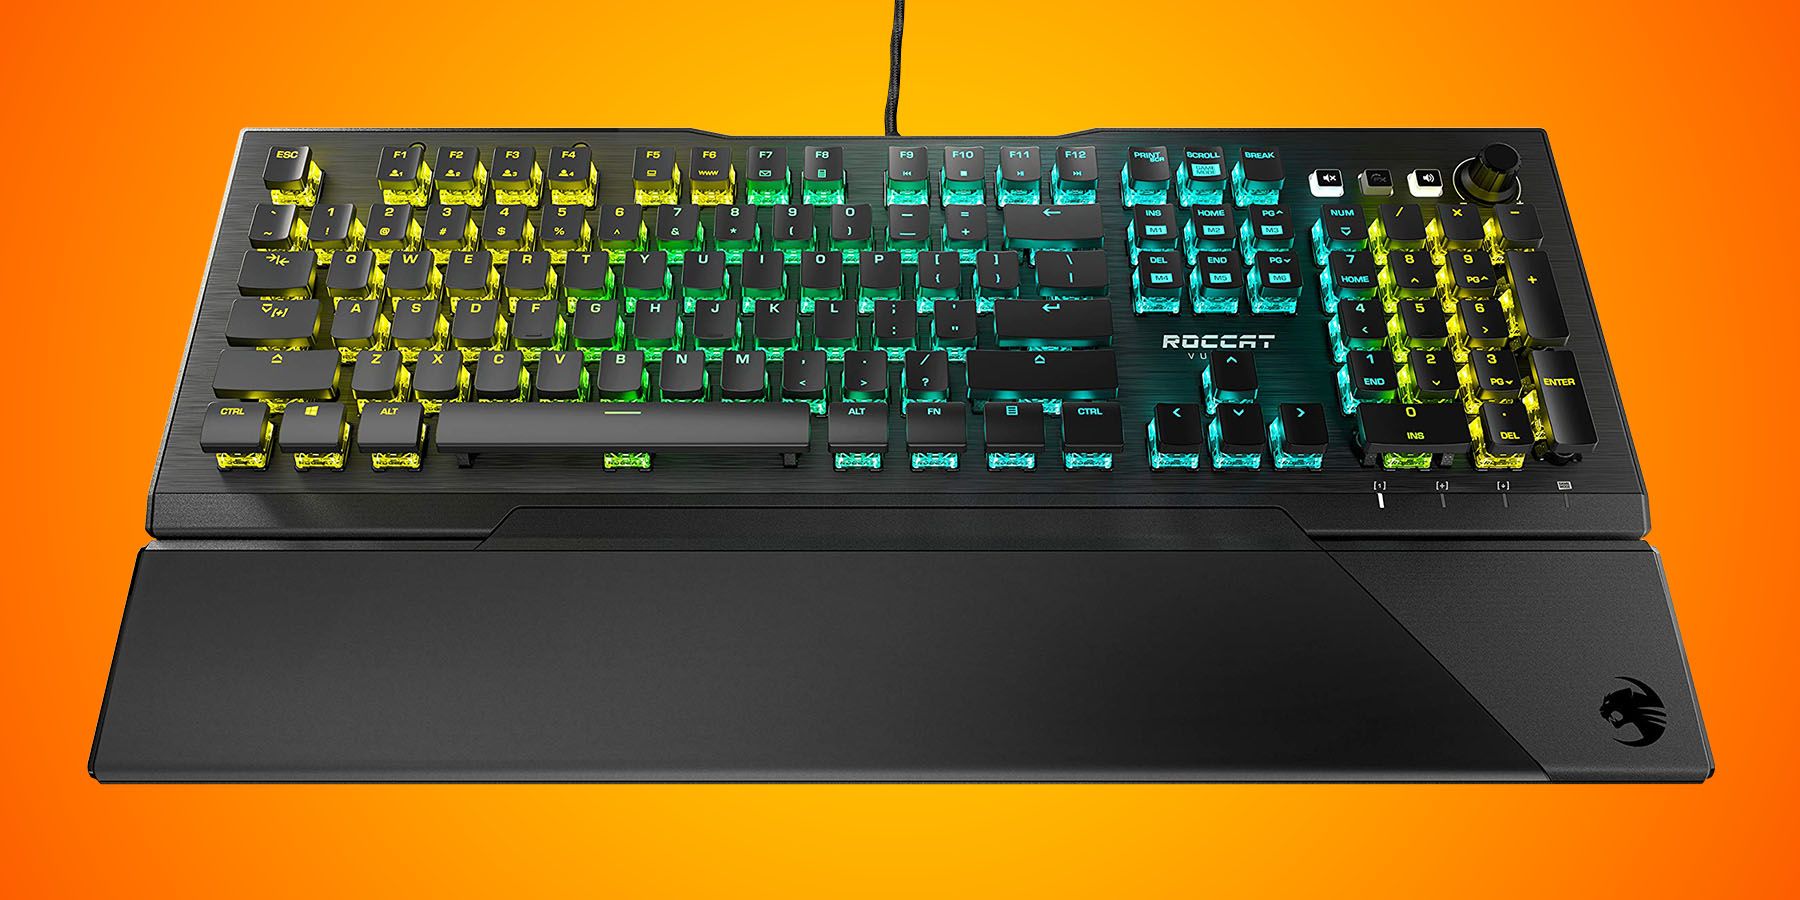 Get the ROCCAT Vulcan Pro Gaming Keyboard Now for $99.99